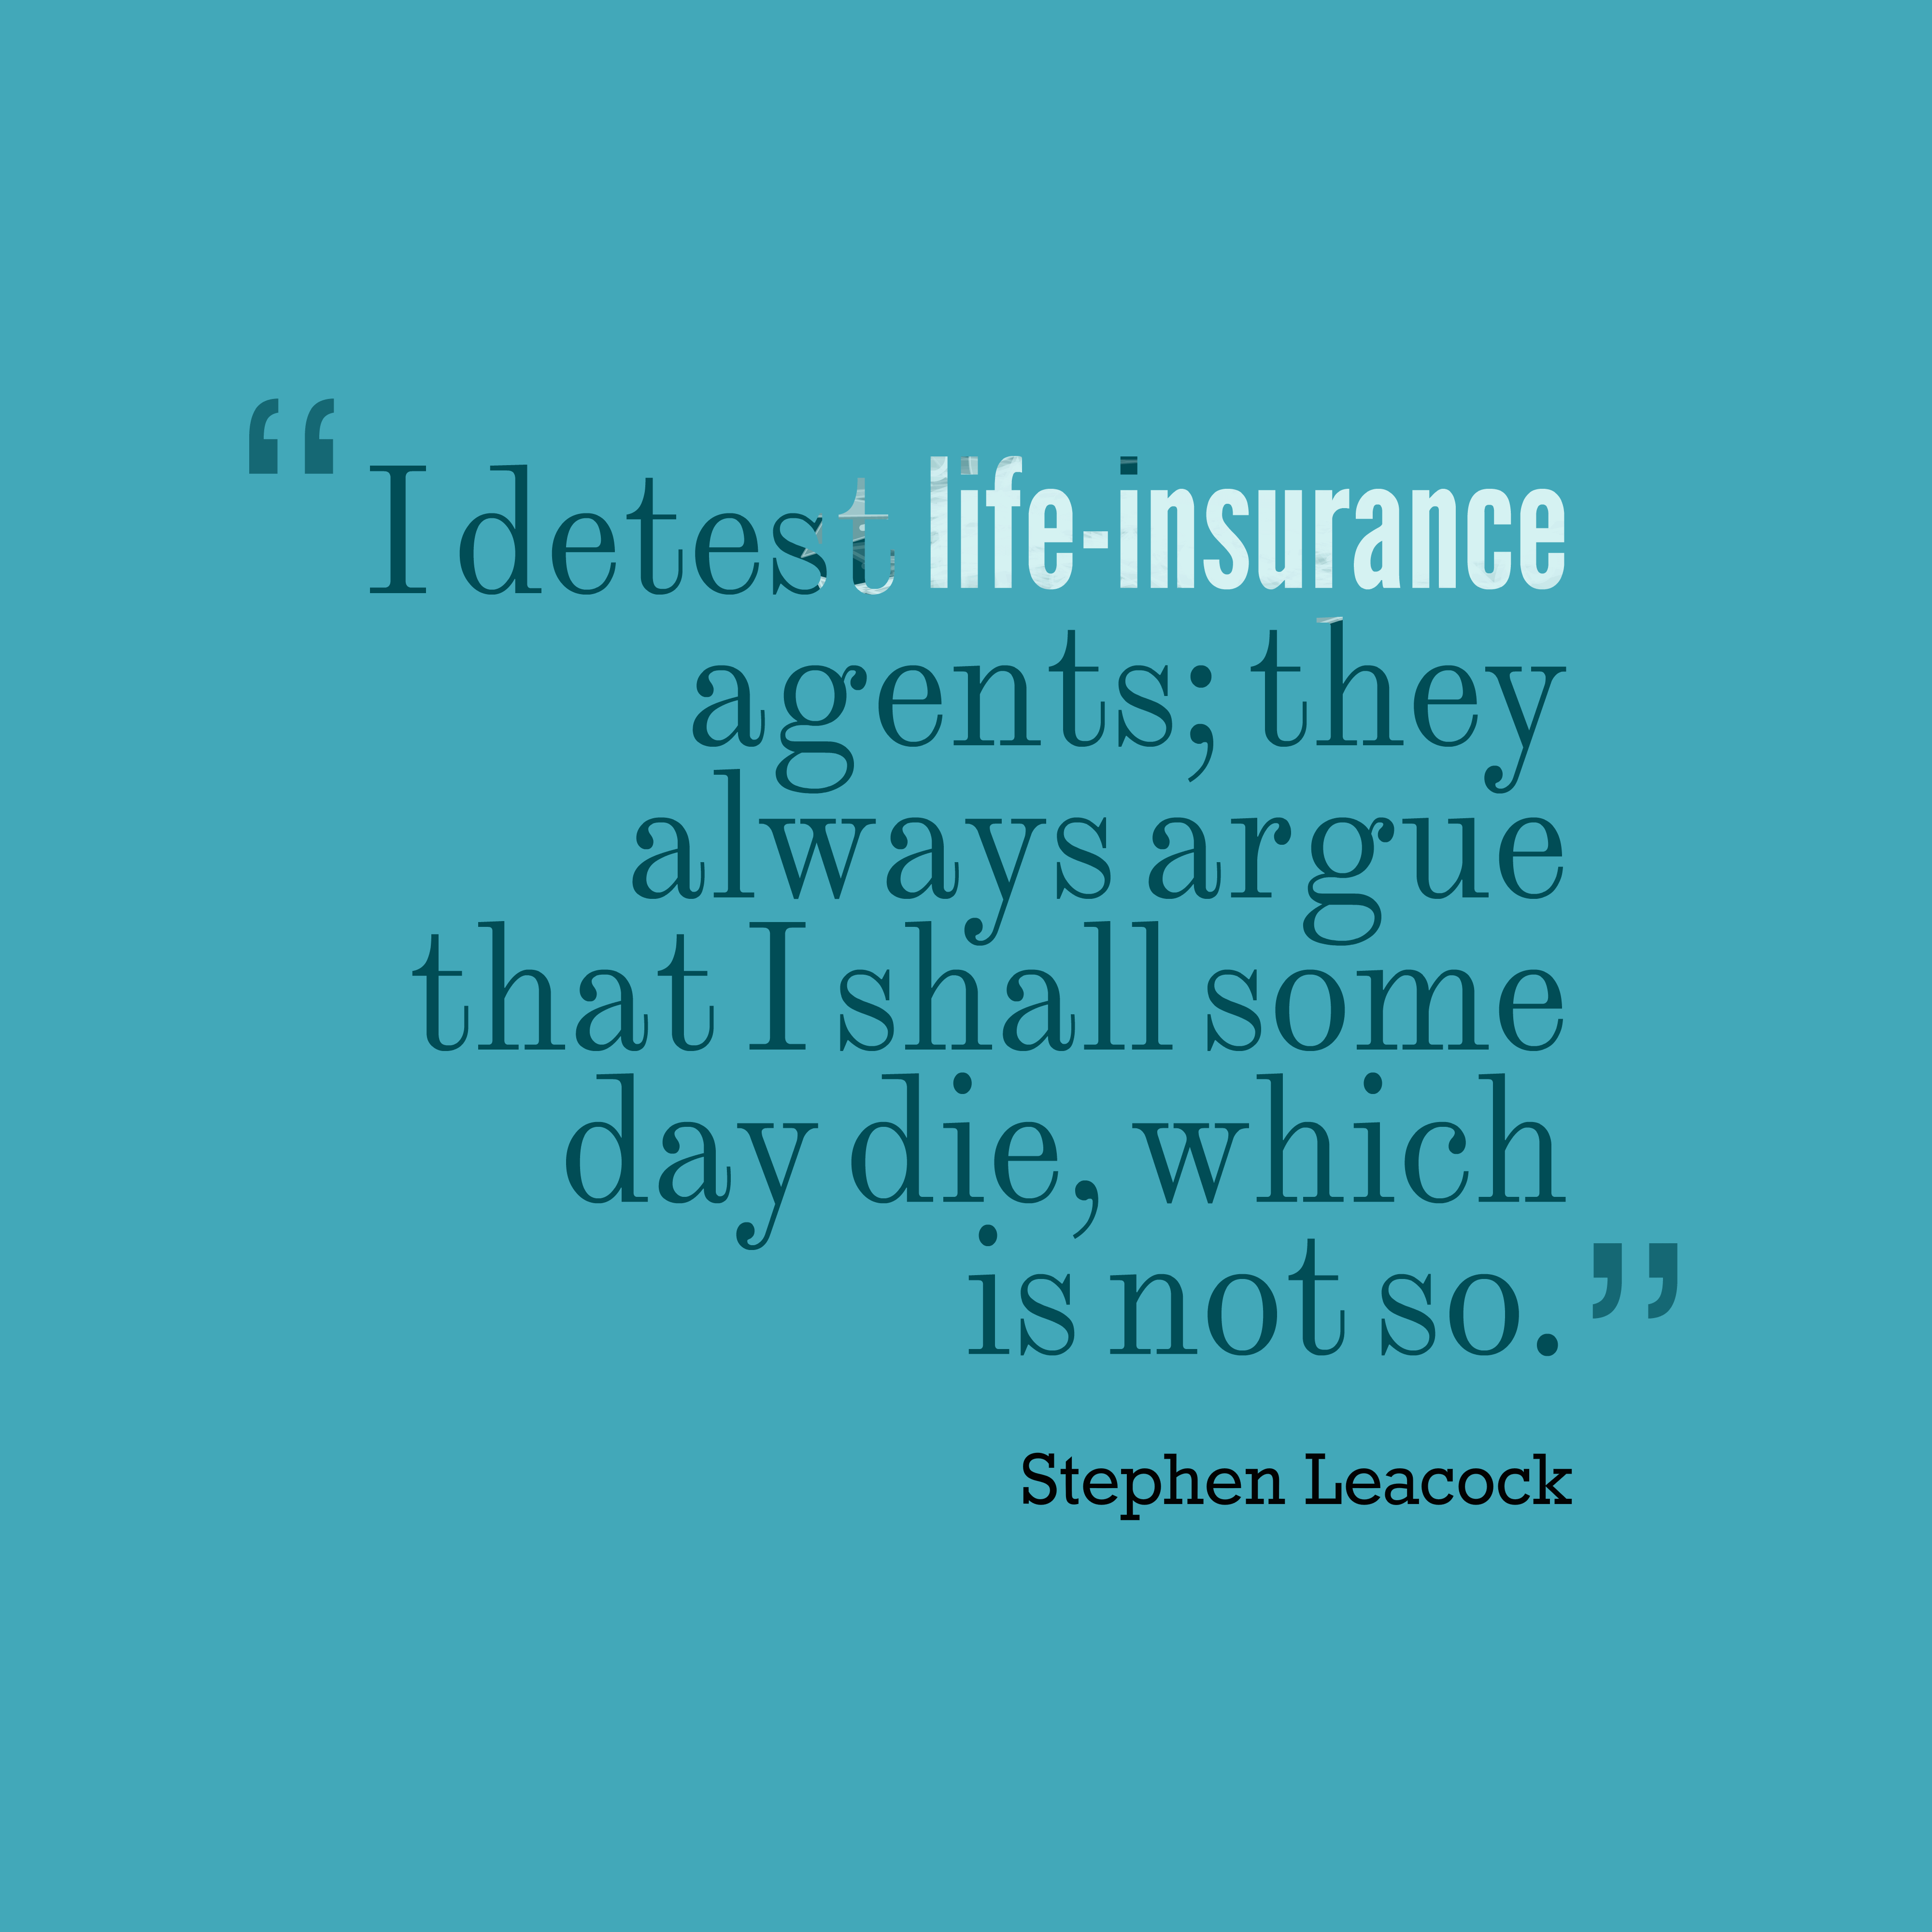 Funny Quotes About Life Insurance - canvas-ville